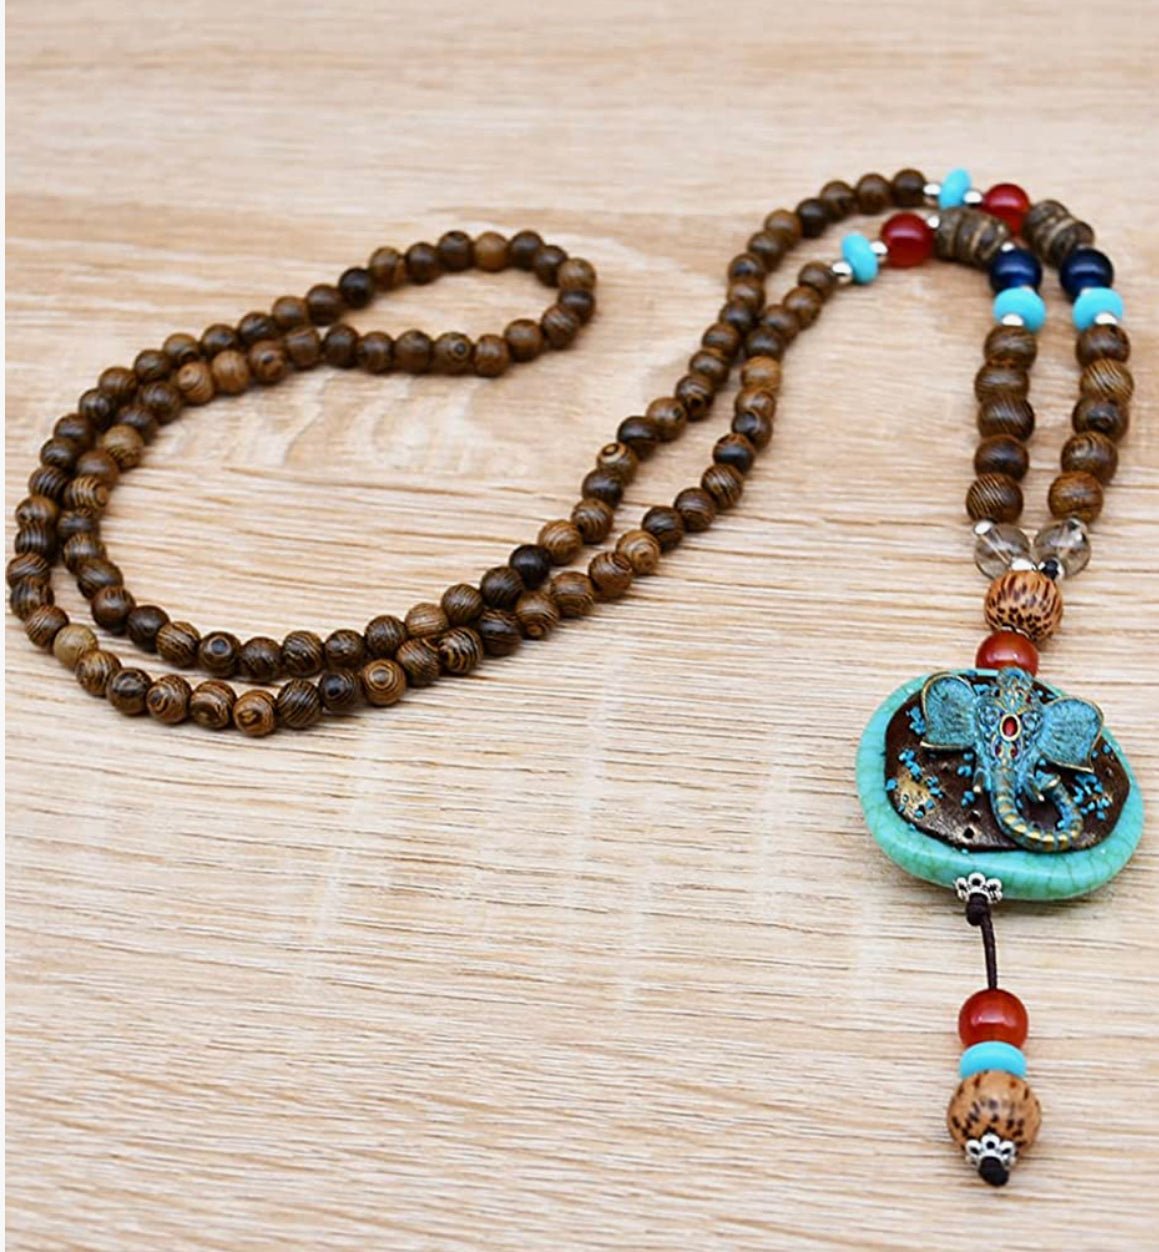 Turquoise Wood Beads Necklace - Sonya's Warehouse